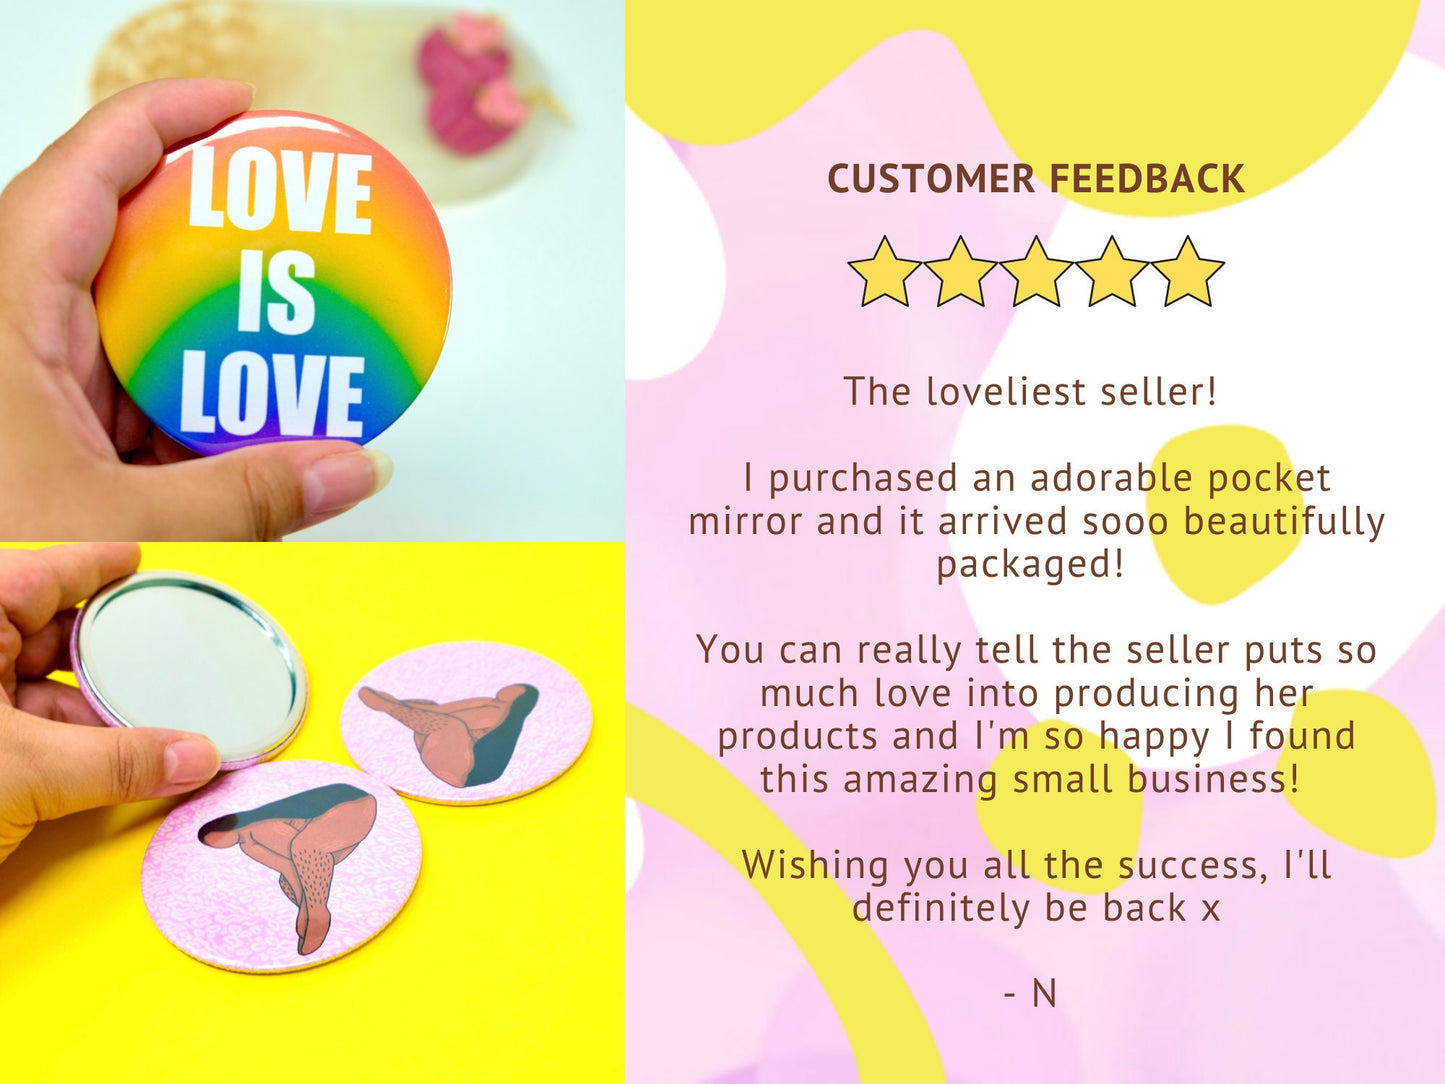 Flawless nude Pocket Mirror - Cute compact mirror promoting self love - body positive handheld beauty mirror